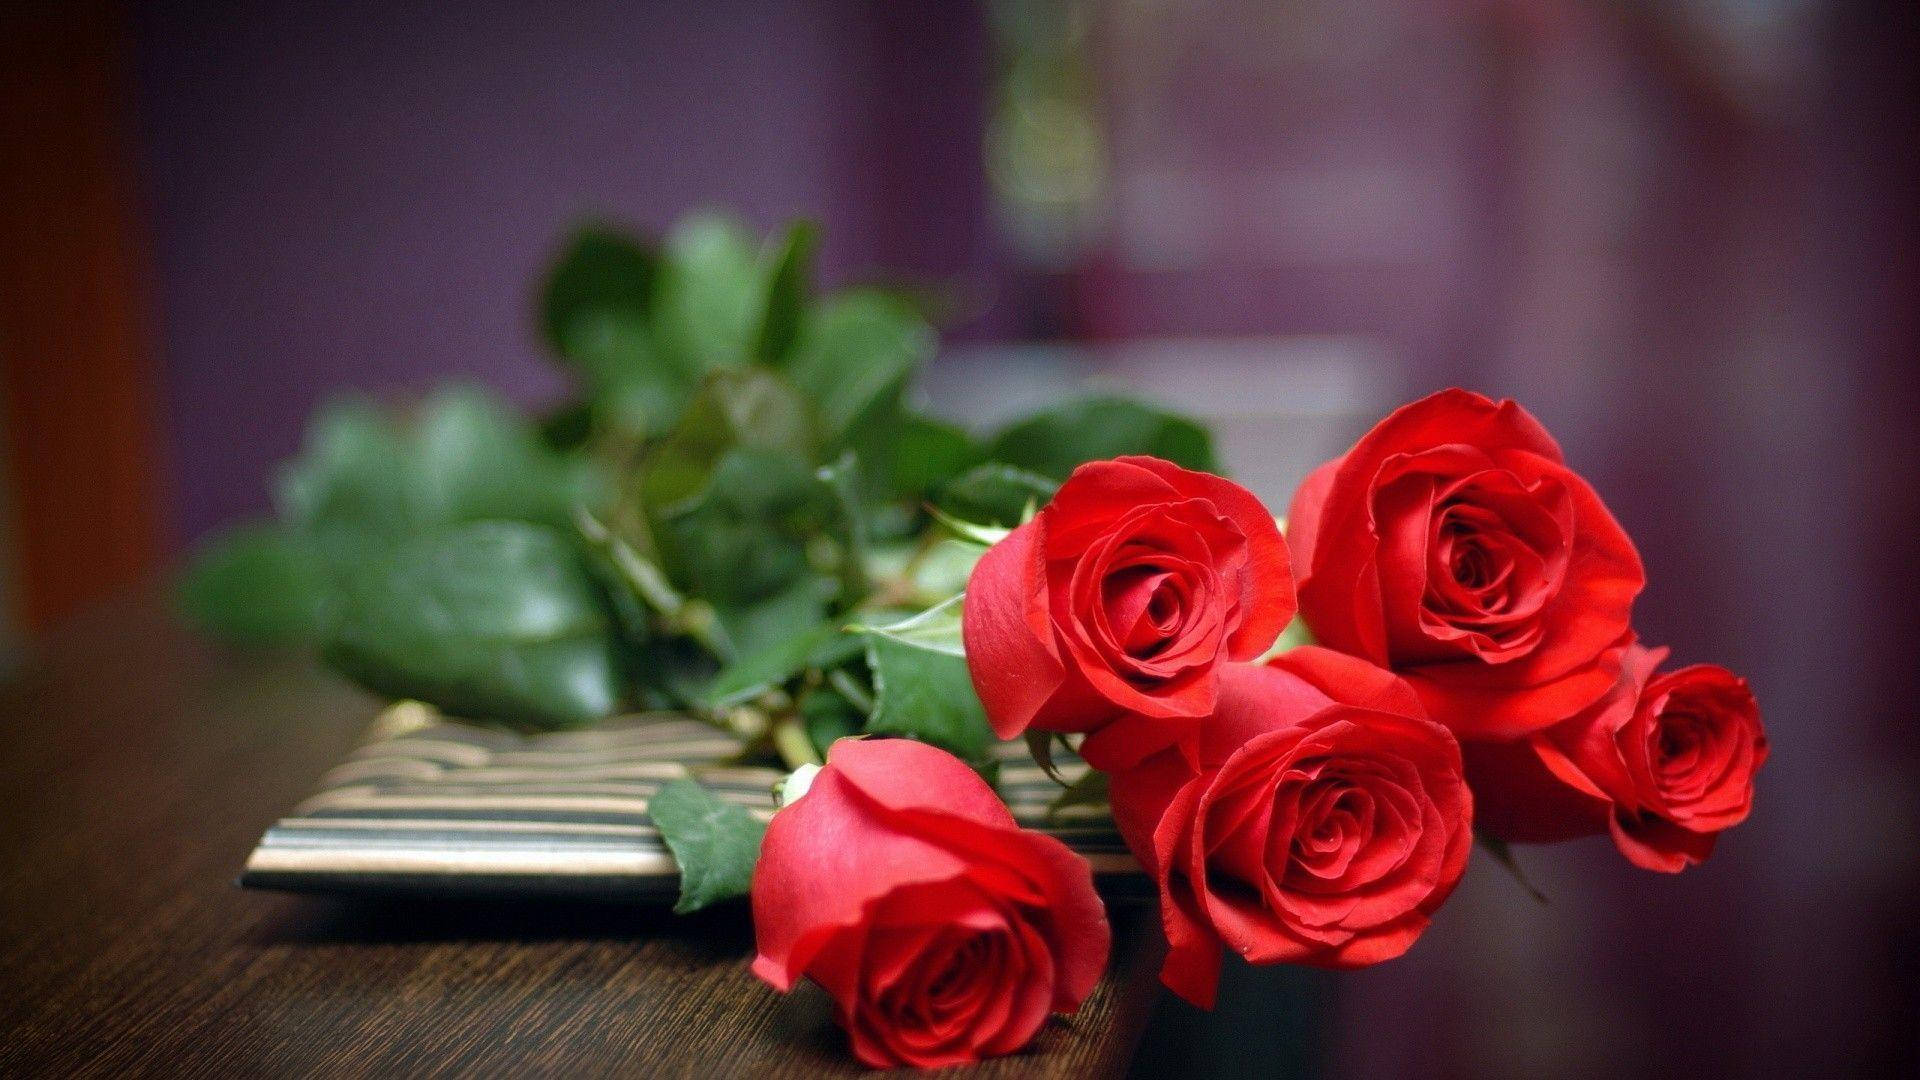 Five Red Rose Flowers Background